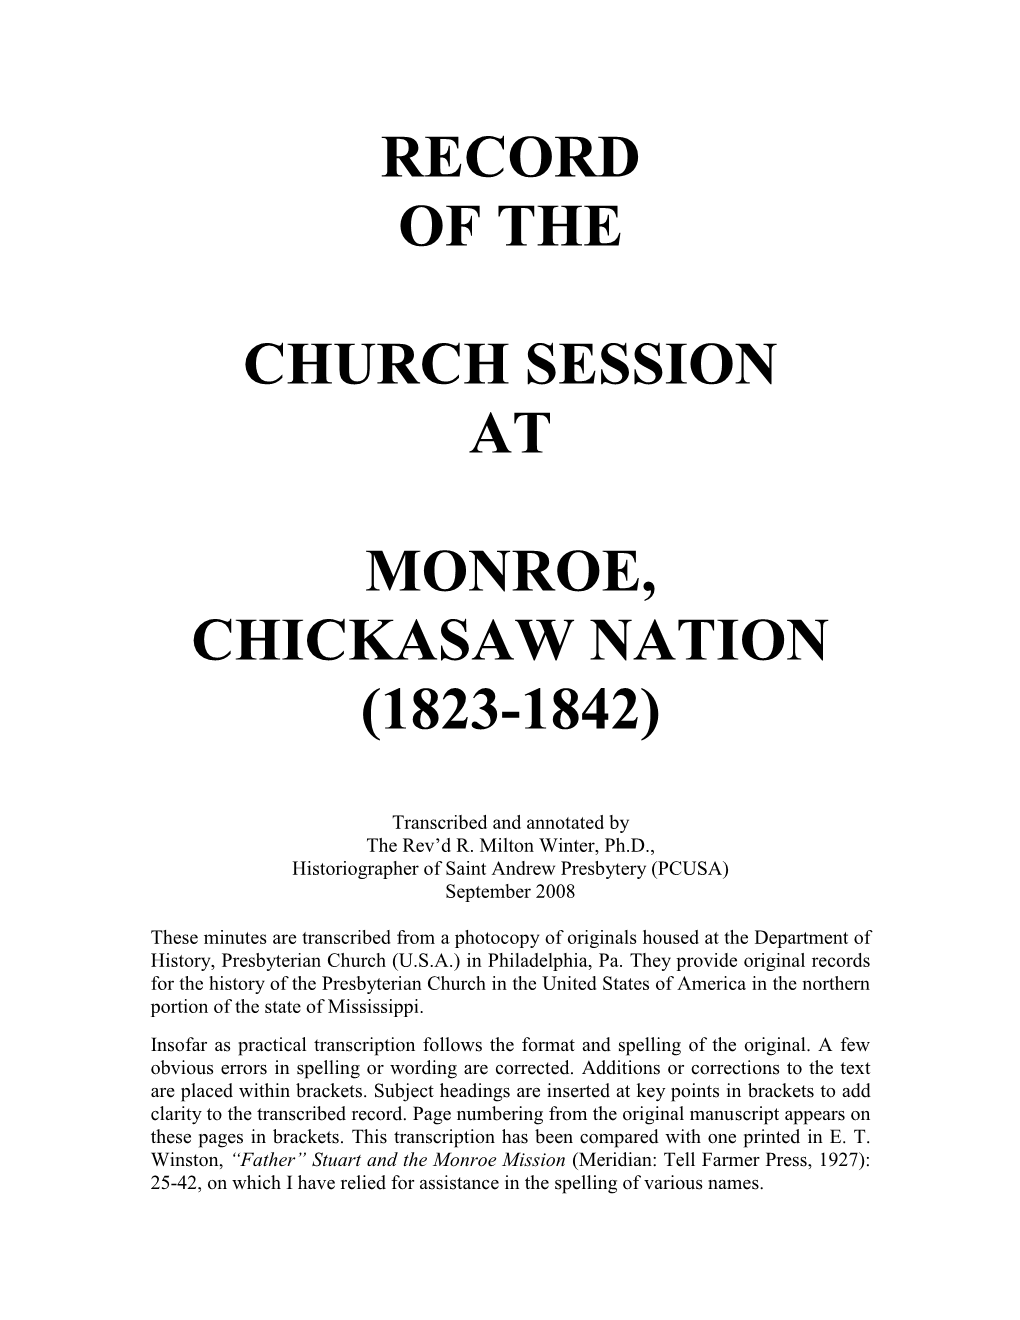 Record of the Church Session at Monroe, Chickasaw Nation, 1823